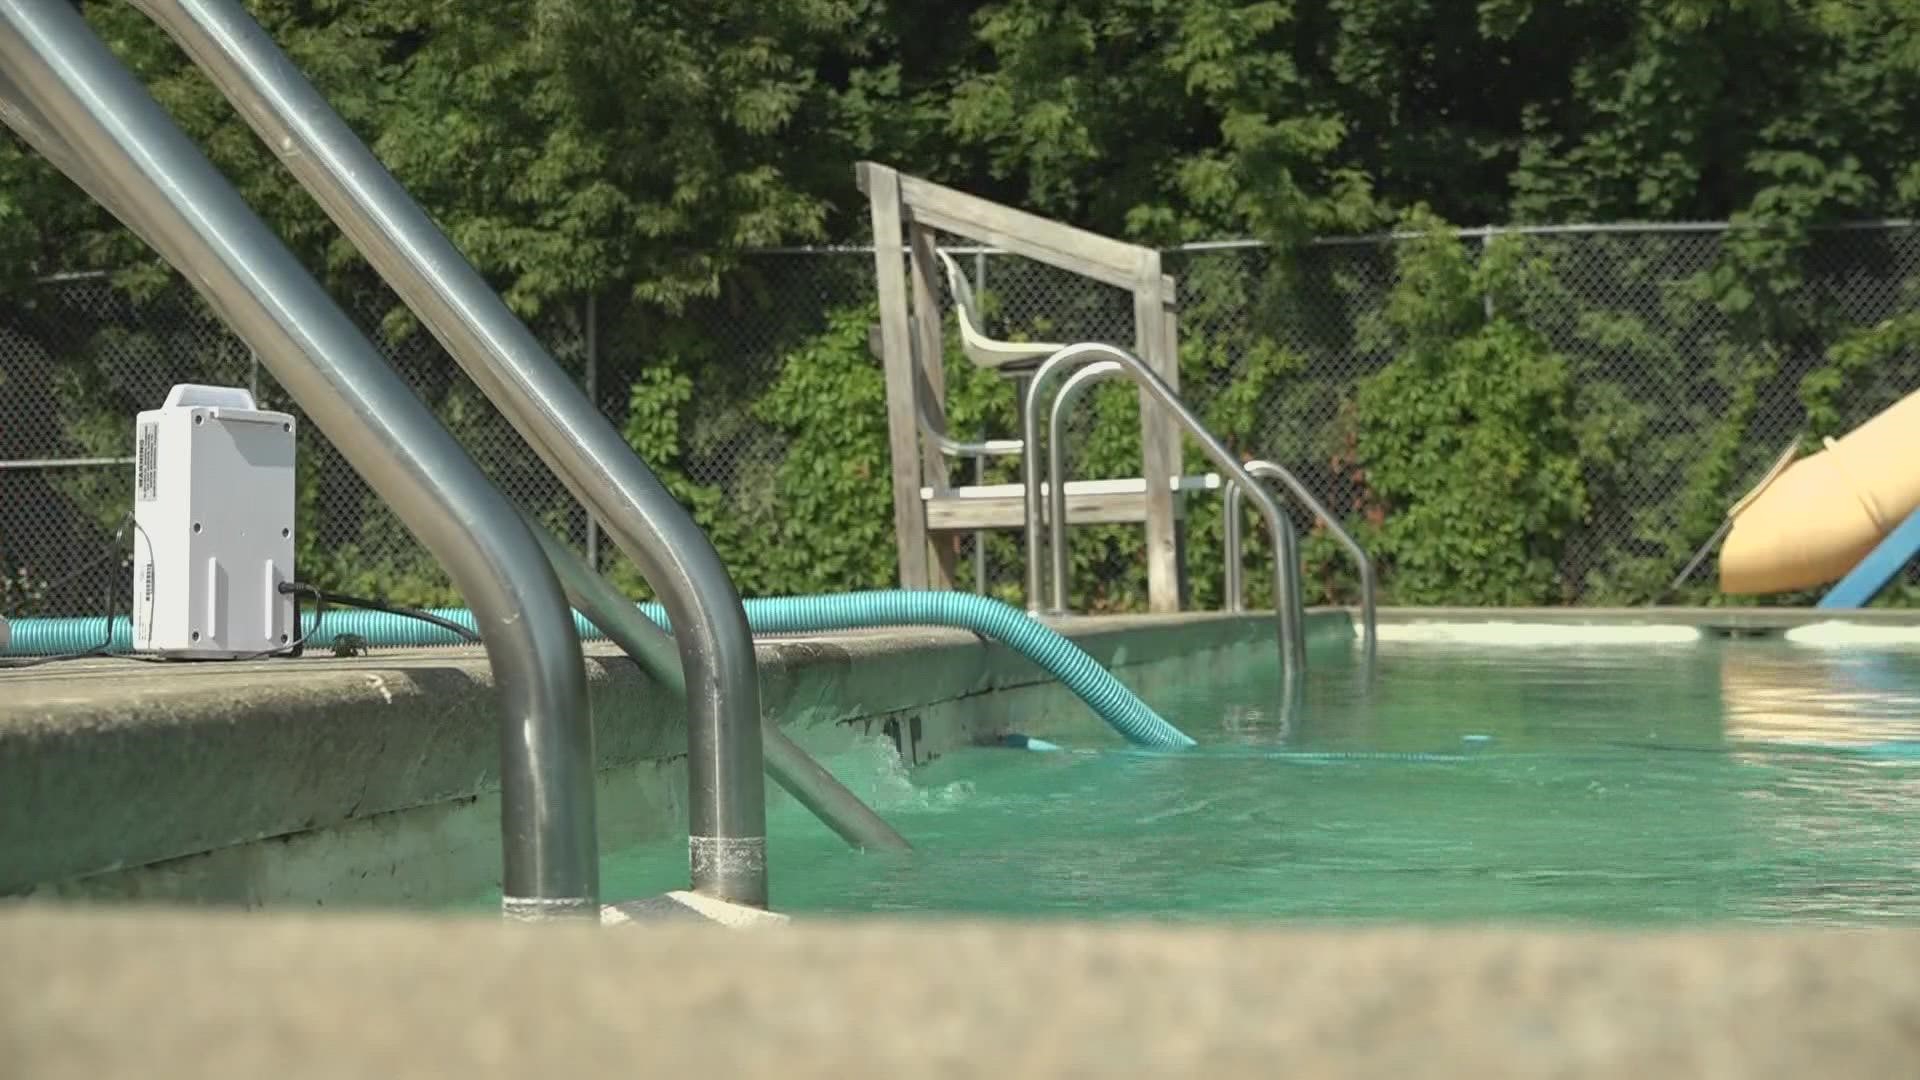 Bangor is now able to open both city pools this summer with the help of lifeguards from Brewer.